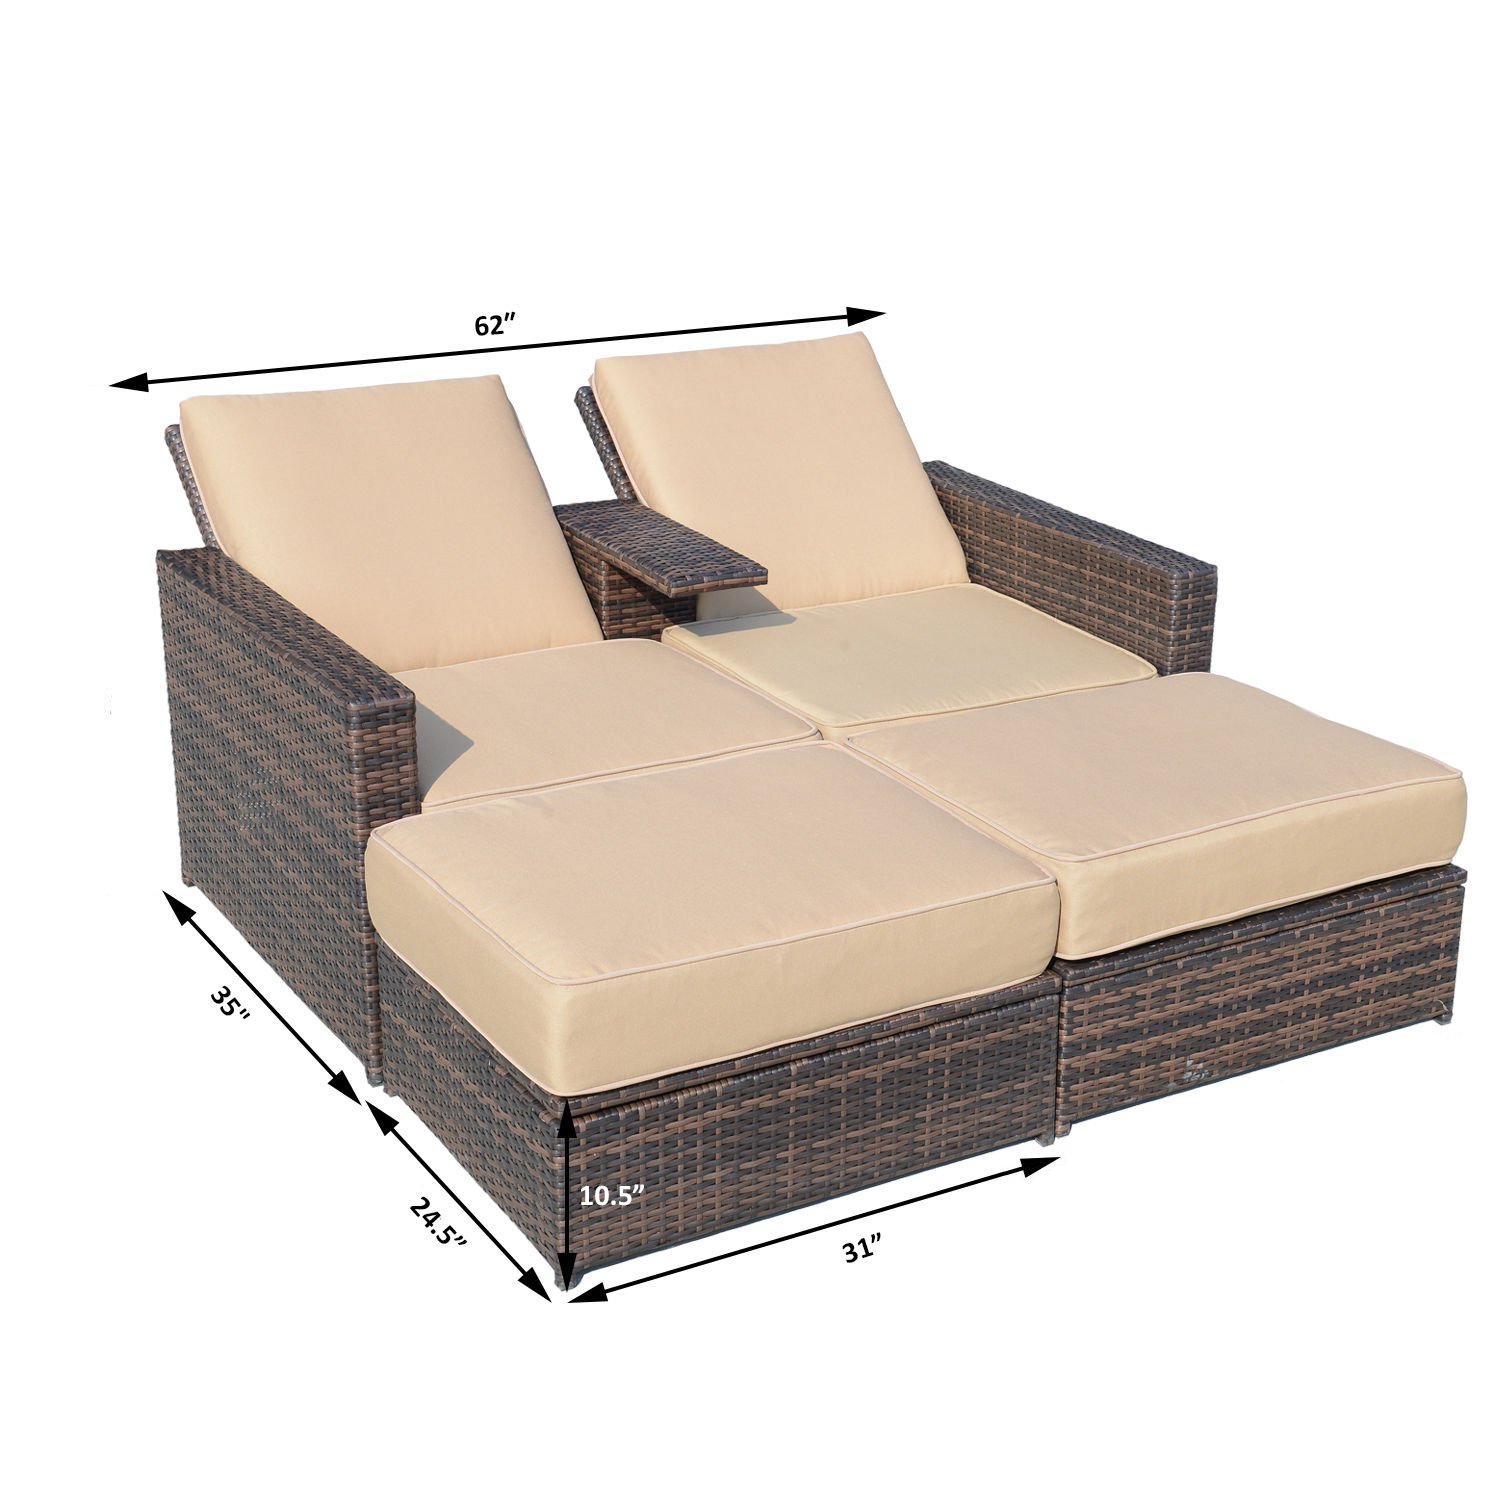 Outsunny 3 Piece Patio Sofa Set Recliner Lounge Ottoman Loveseat Rattan Outdoor, seating capacity-2 - image 4 of 10